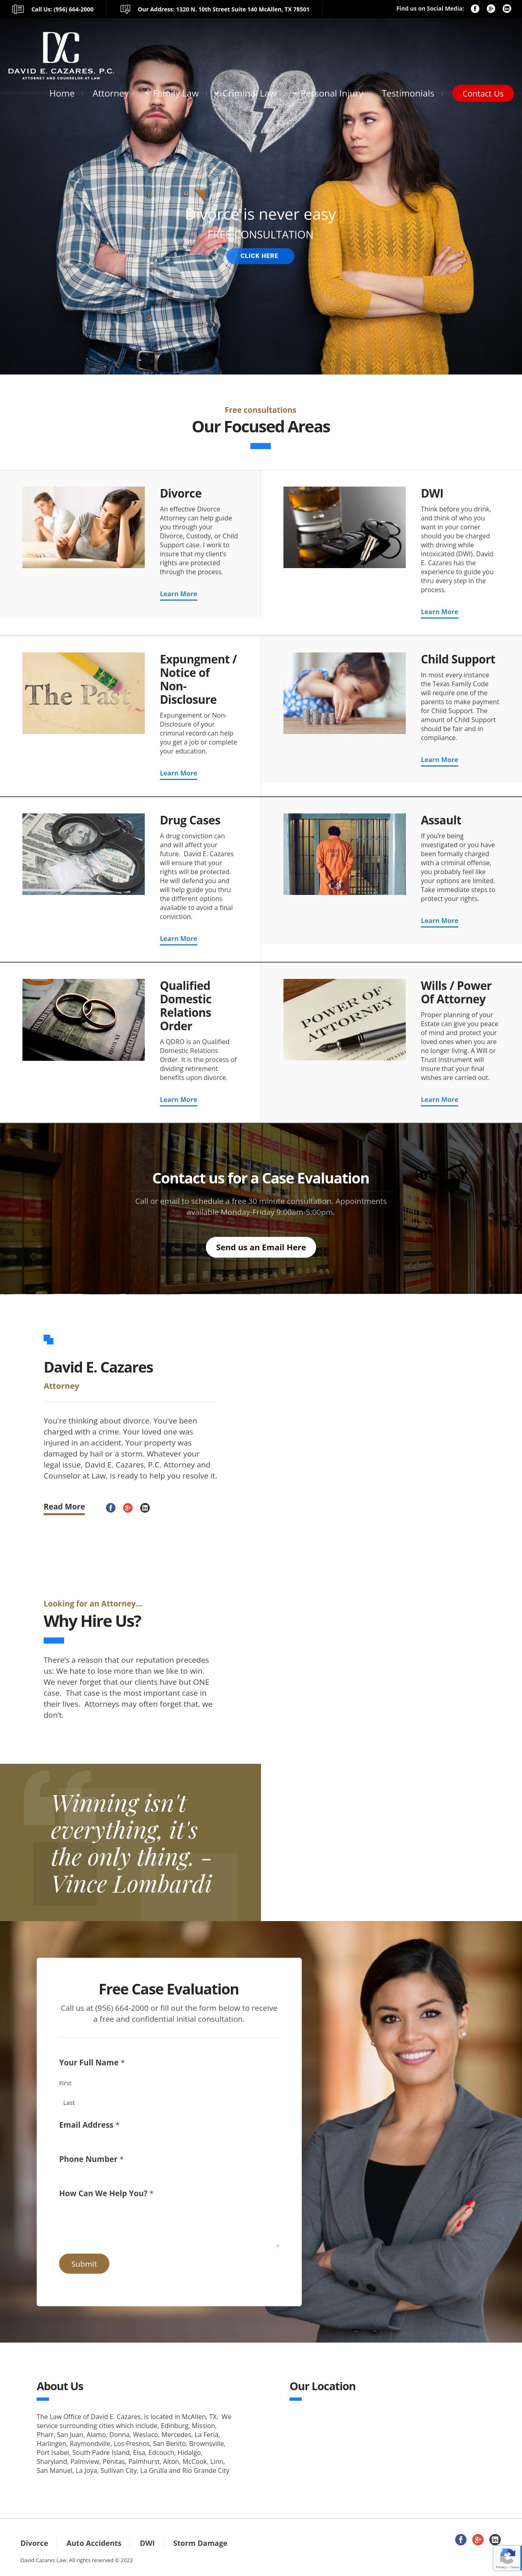 David E. Cazares, P.C. Attorney and Counselor at Law - McAllen TX Lawyers